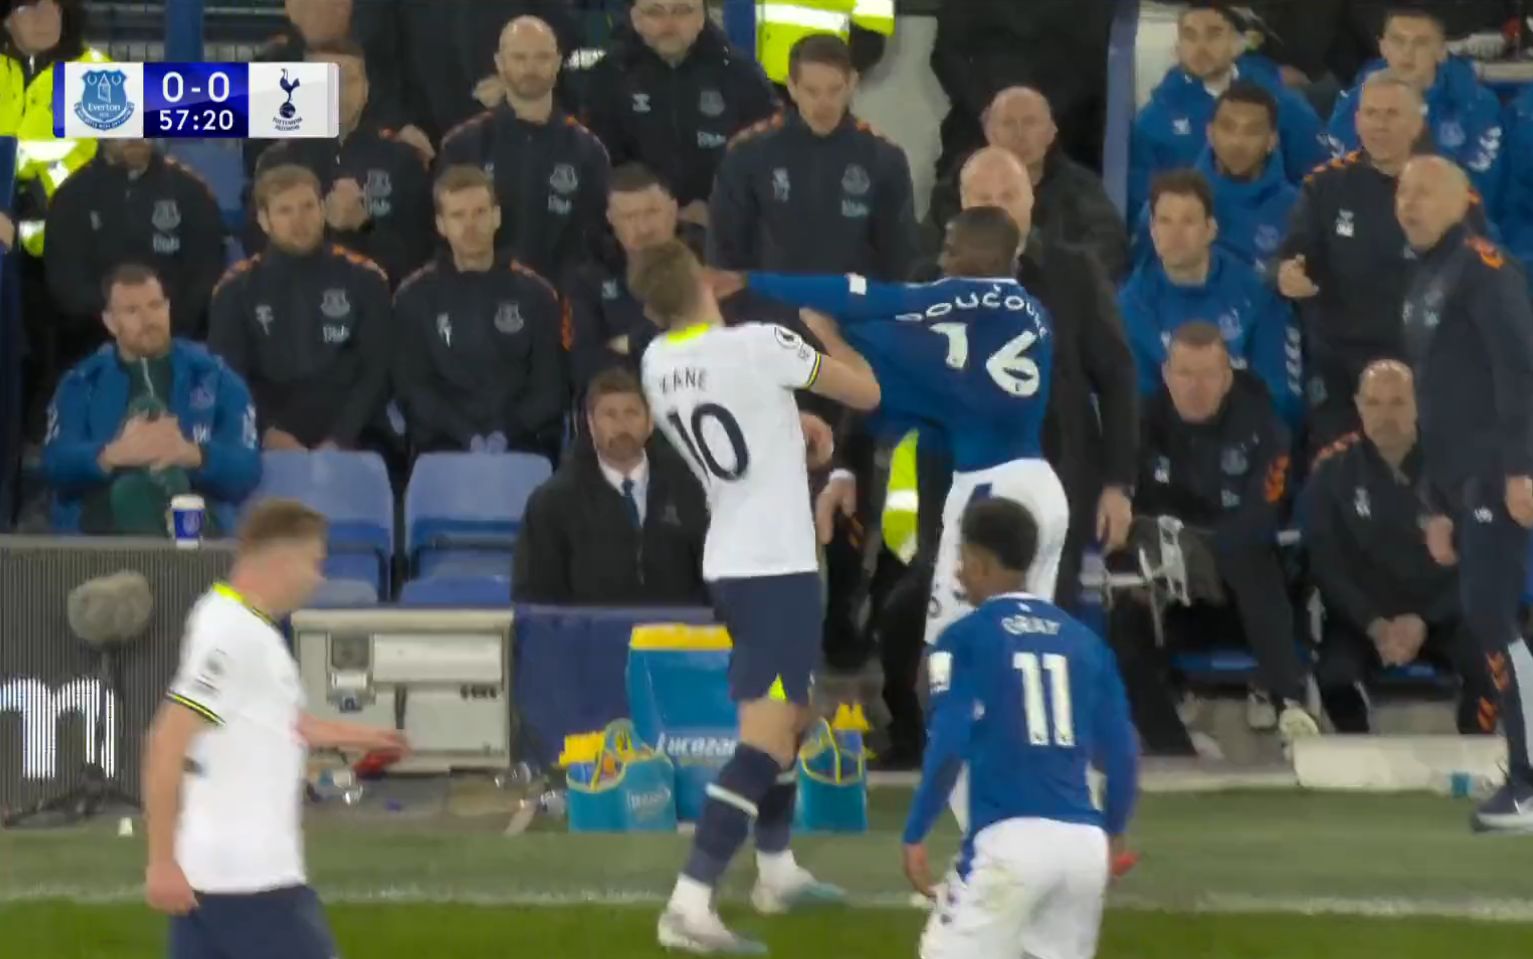 Video: Red card for Everton star after lashing out at Harry Kane’s face thumbnail